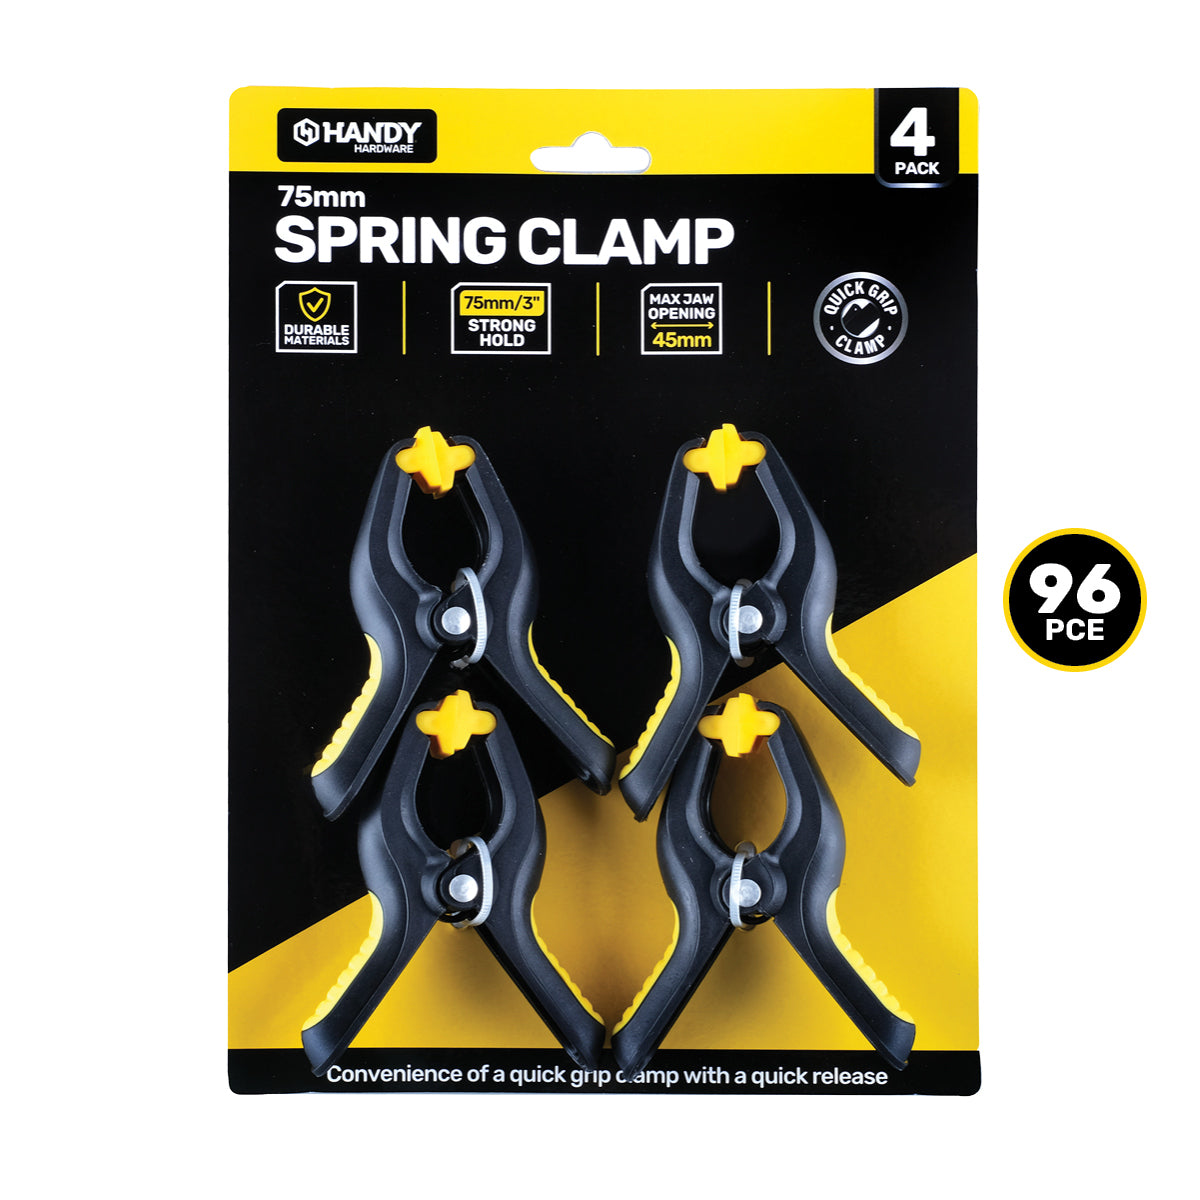 Handy Hardware 96PCE Small Spring Clamps 45mm Jaw Opening Heavy Duty 75mm